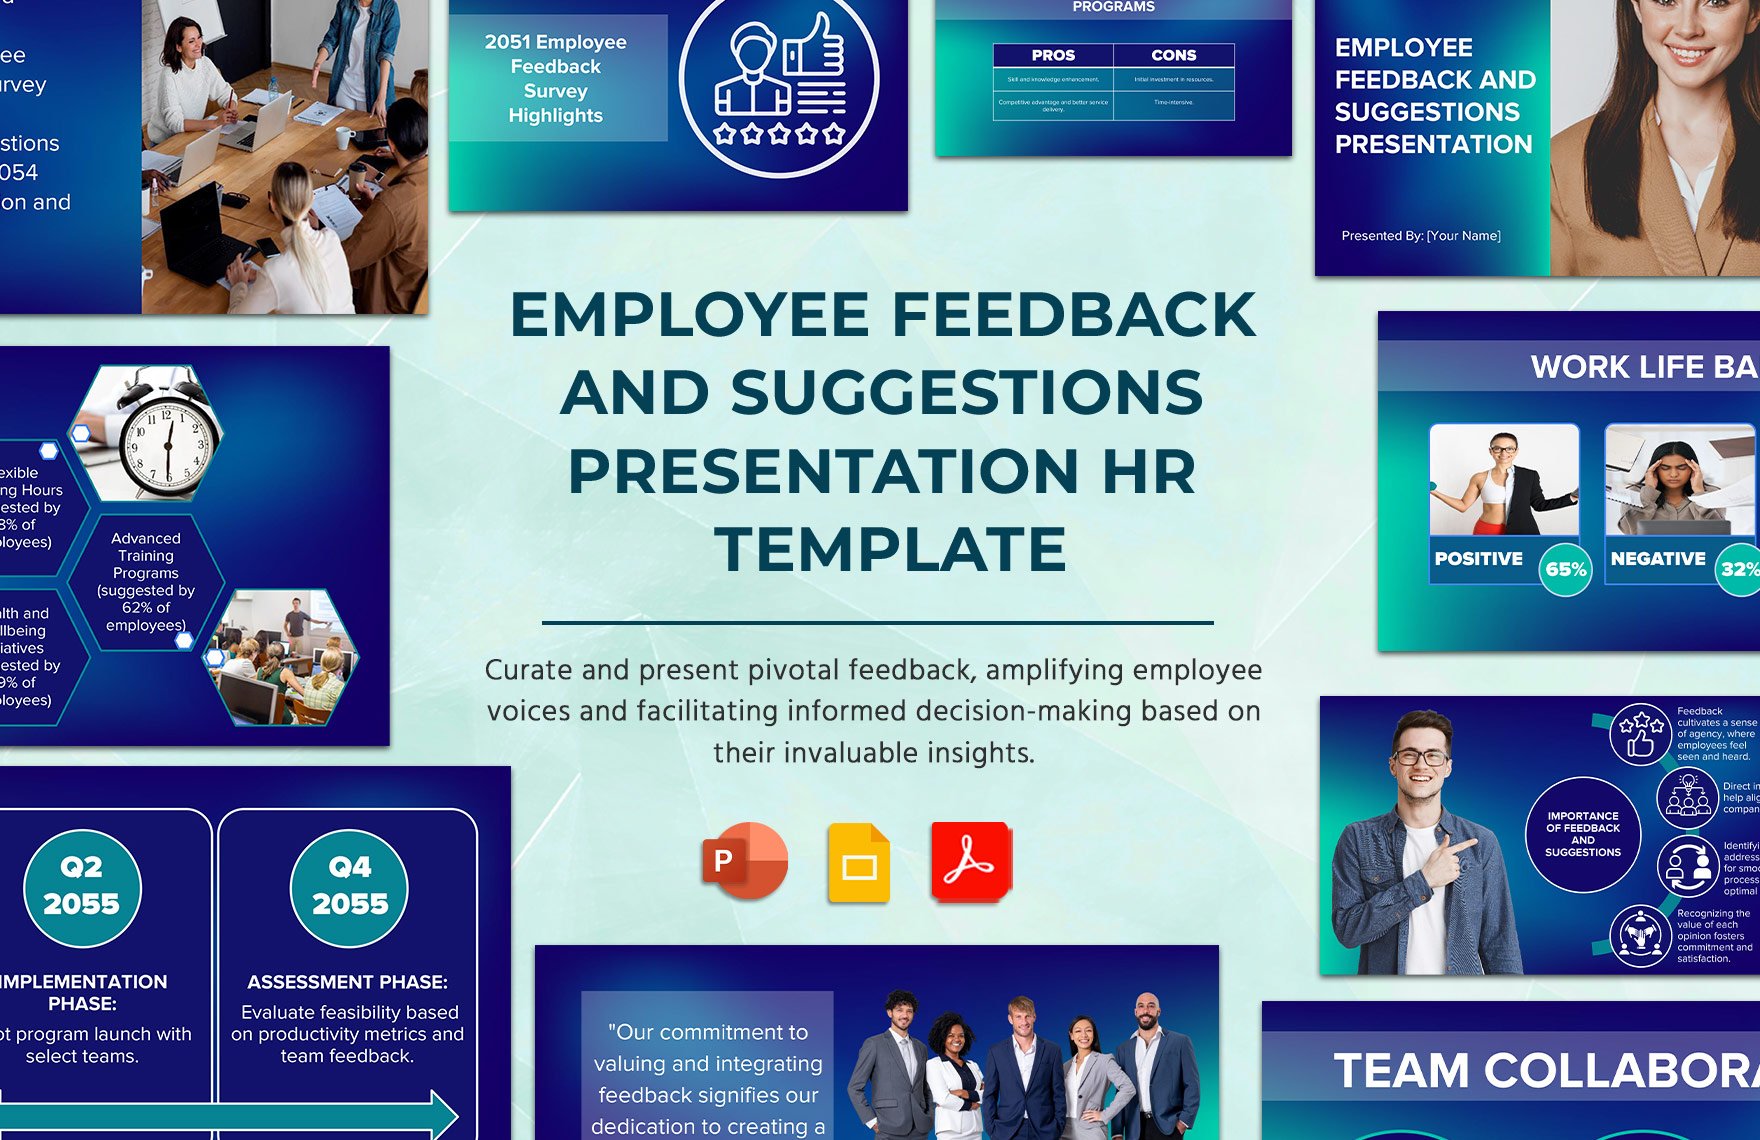 Employee Feedback and Suggestions Presentation HR Template